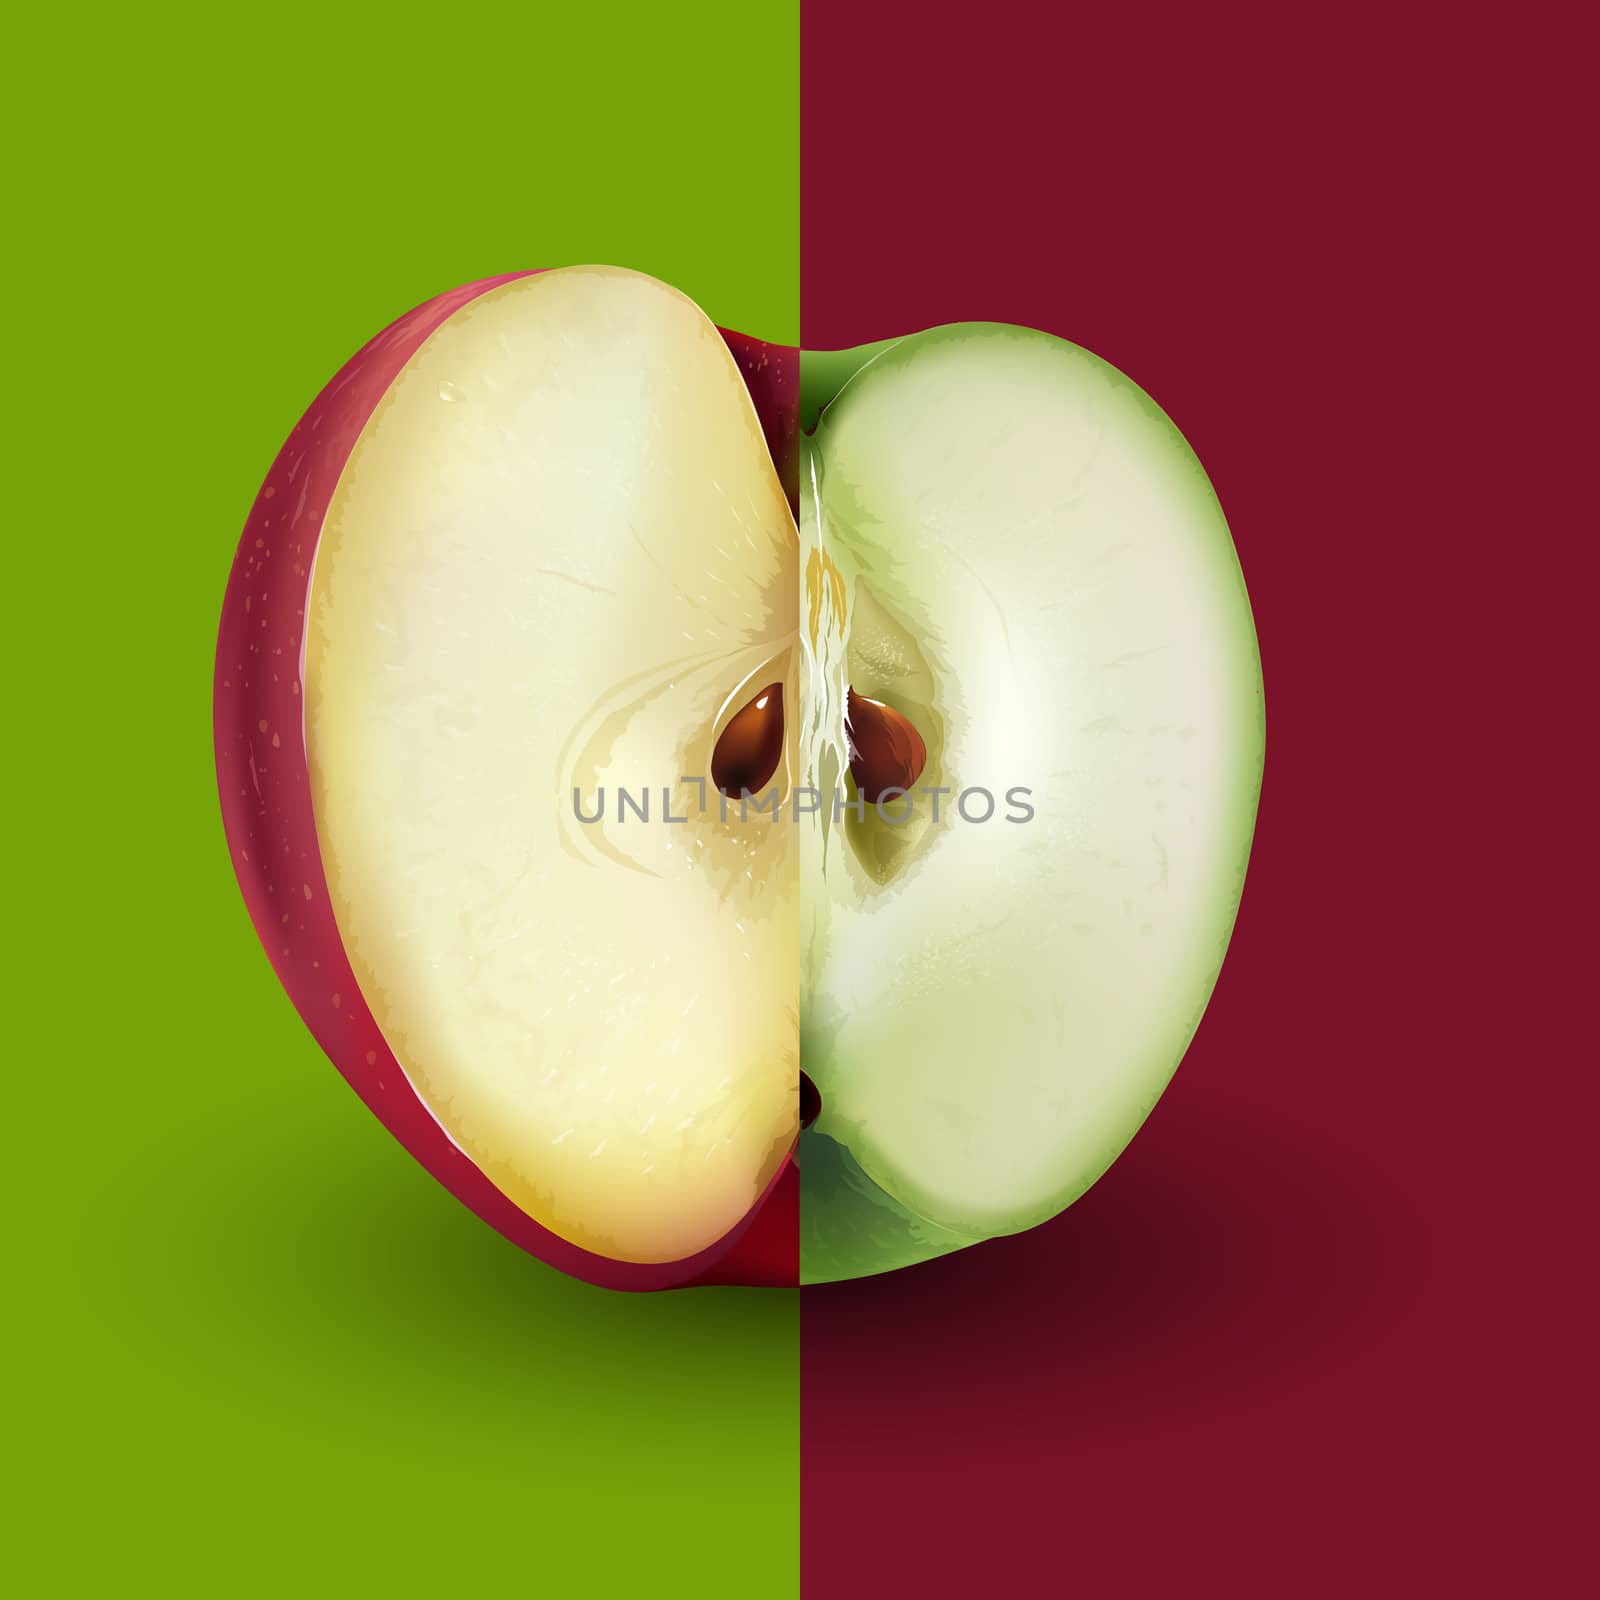 Green and red apples on a background.